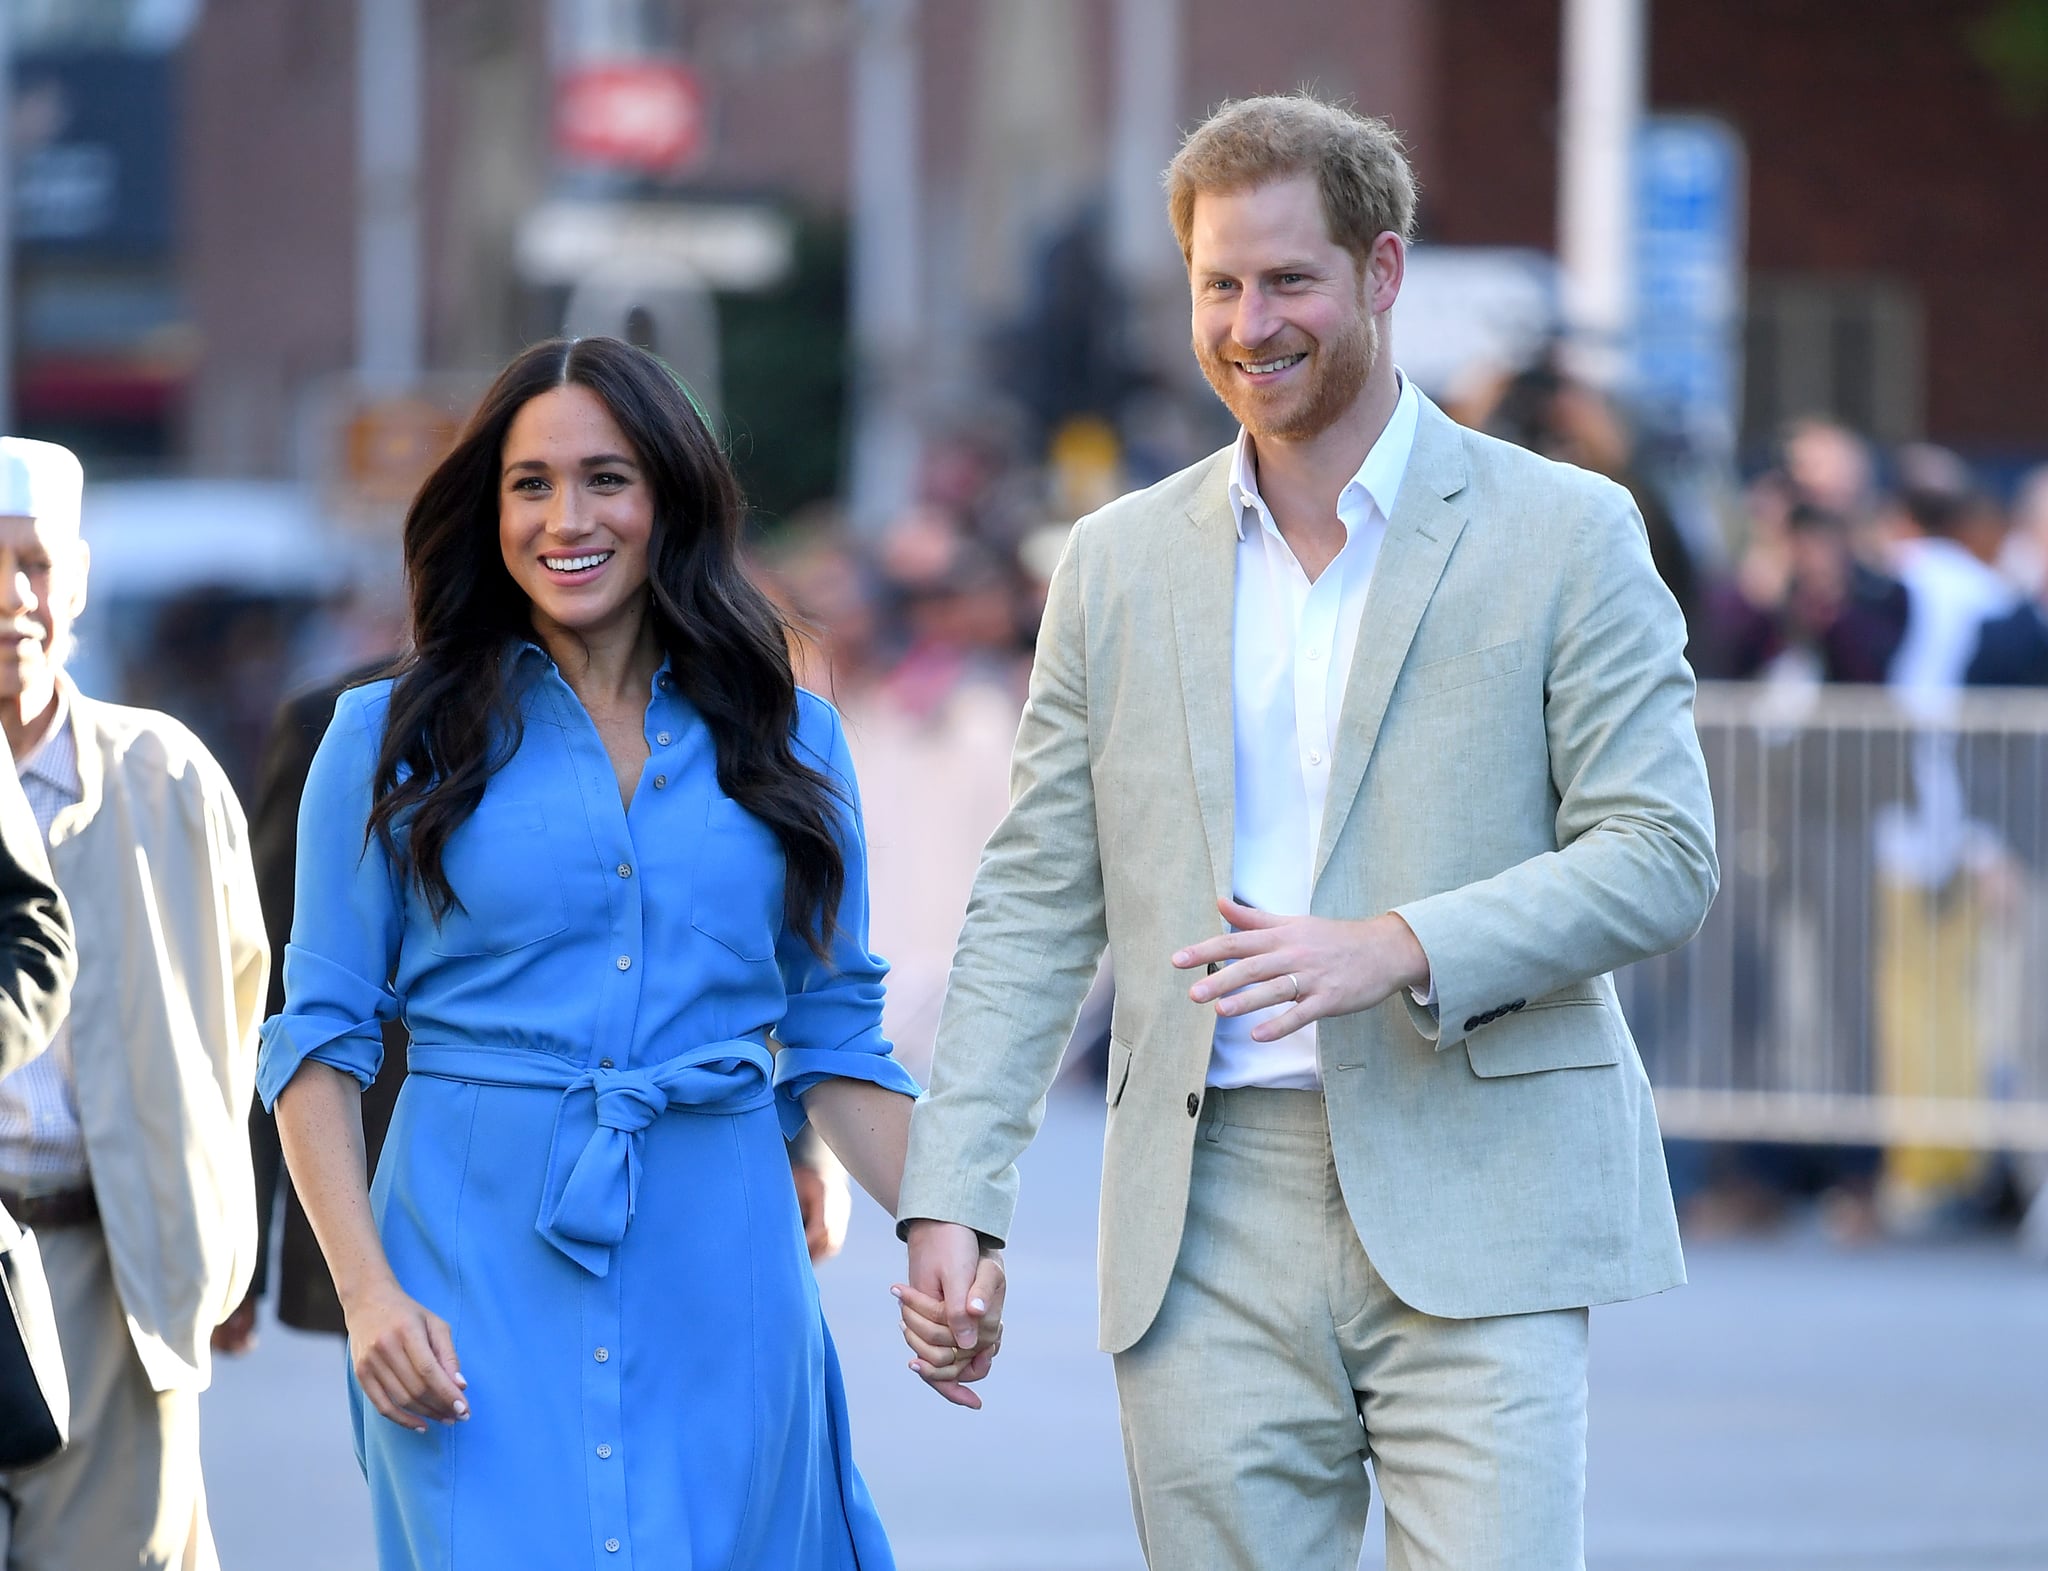 CAPE TOWN, SOUTH AFRICA - SEPTEMBER 23: Meghan, Duchess of Sussex and Prince Harry, Duke of Sussex visit the District Six Homecoming Centre during their royal tour of South Africa on September 23, 2019 in Cape Town, South Africa. (Photo by Karwai Tang/WireImage)